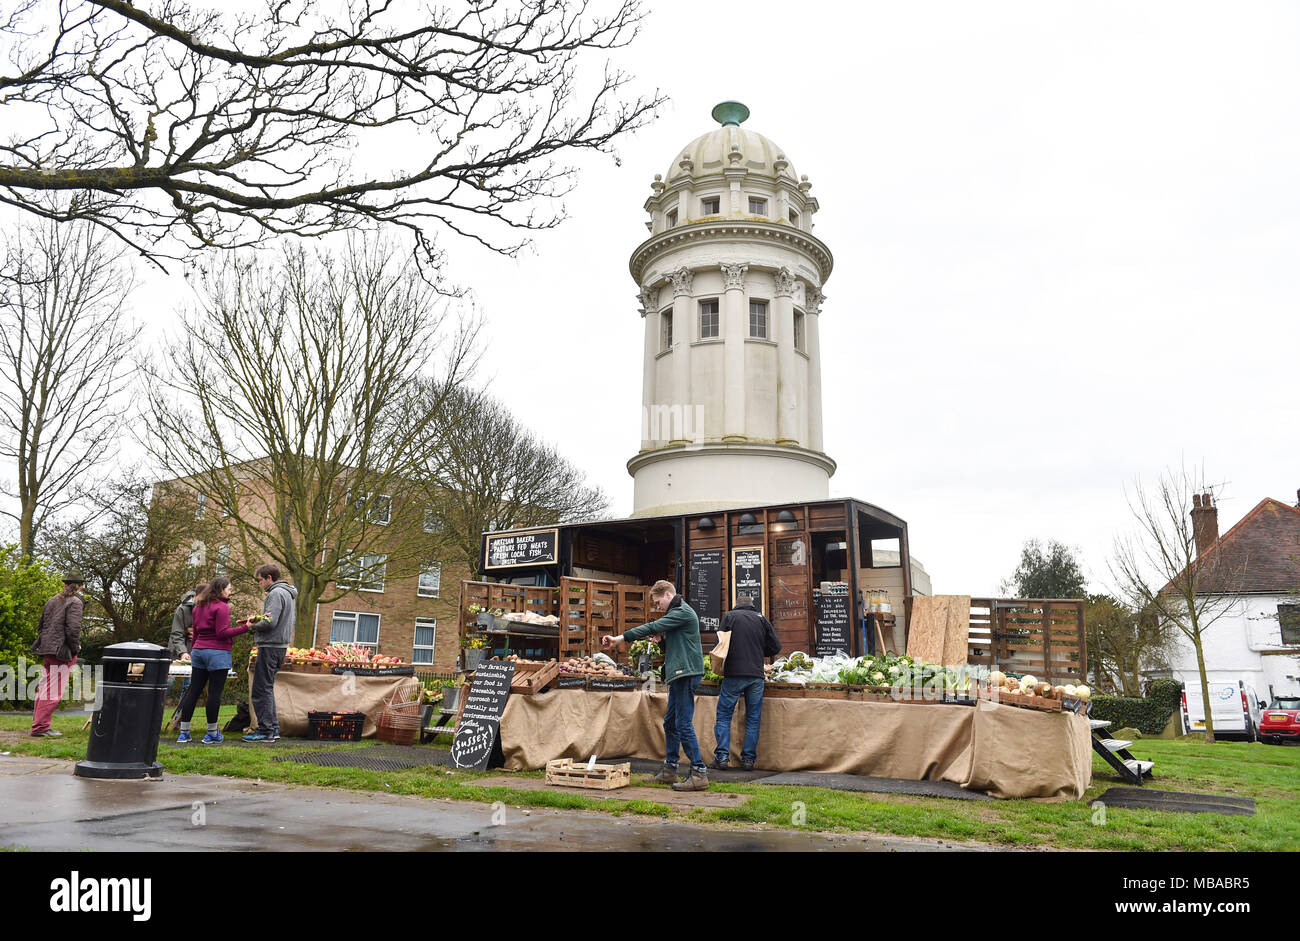 The Sussex Peasant mobile farm shop set up beside the Pepper Pot at Queens Park in Brighton . Stock Photo